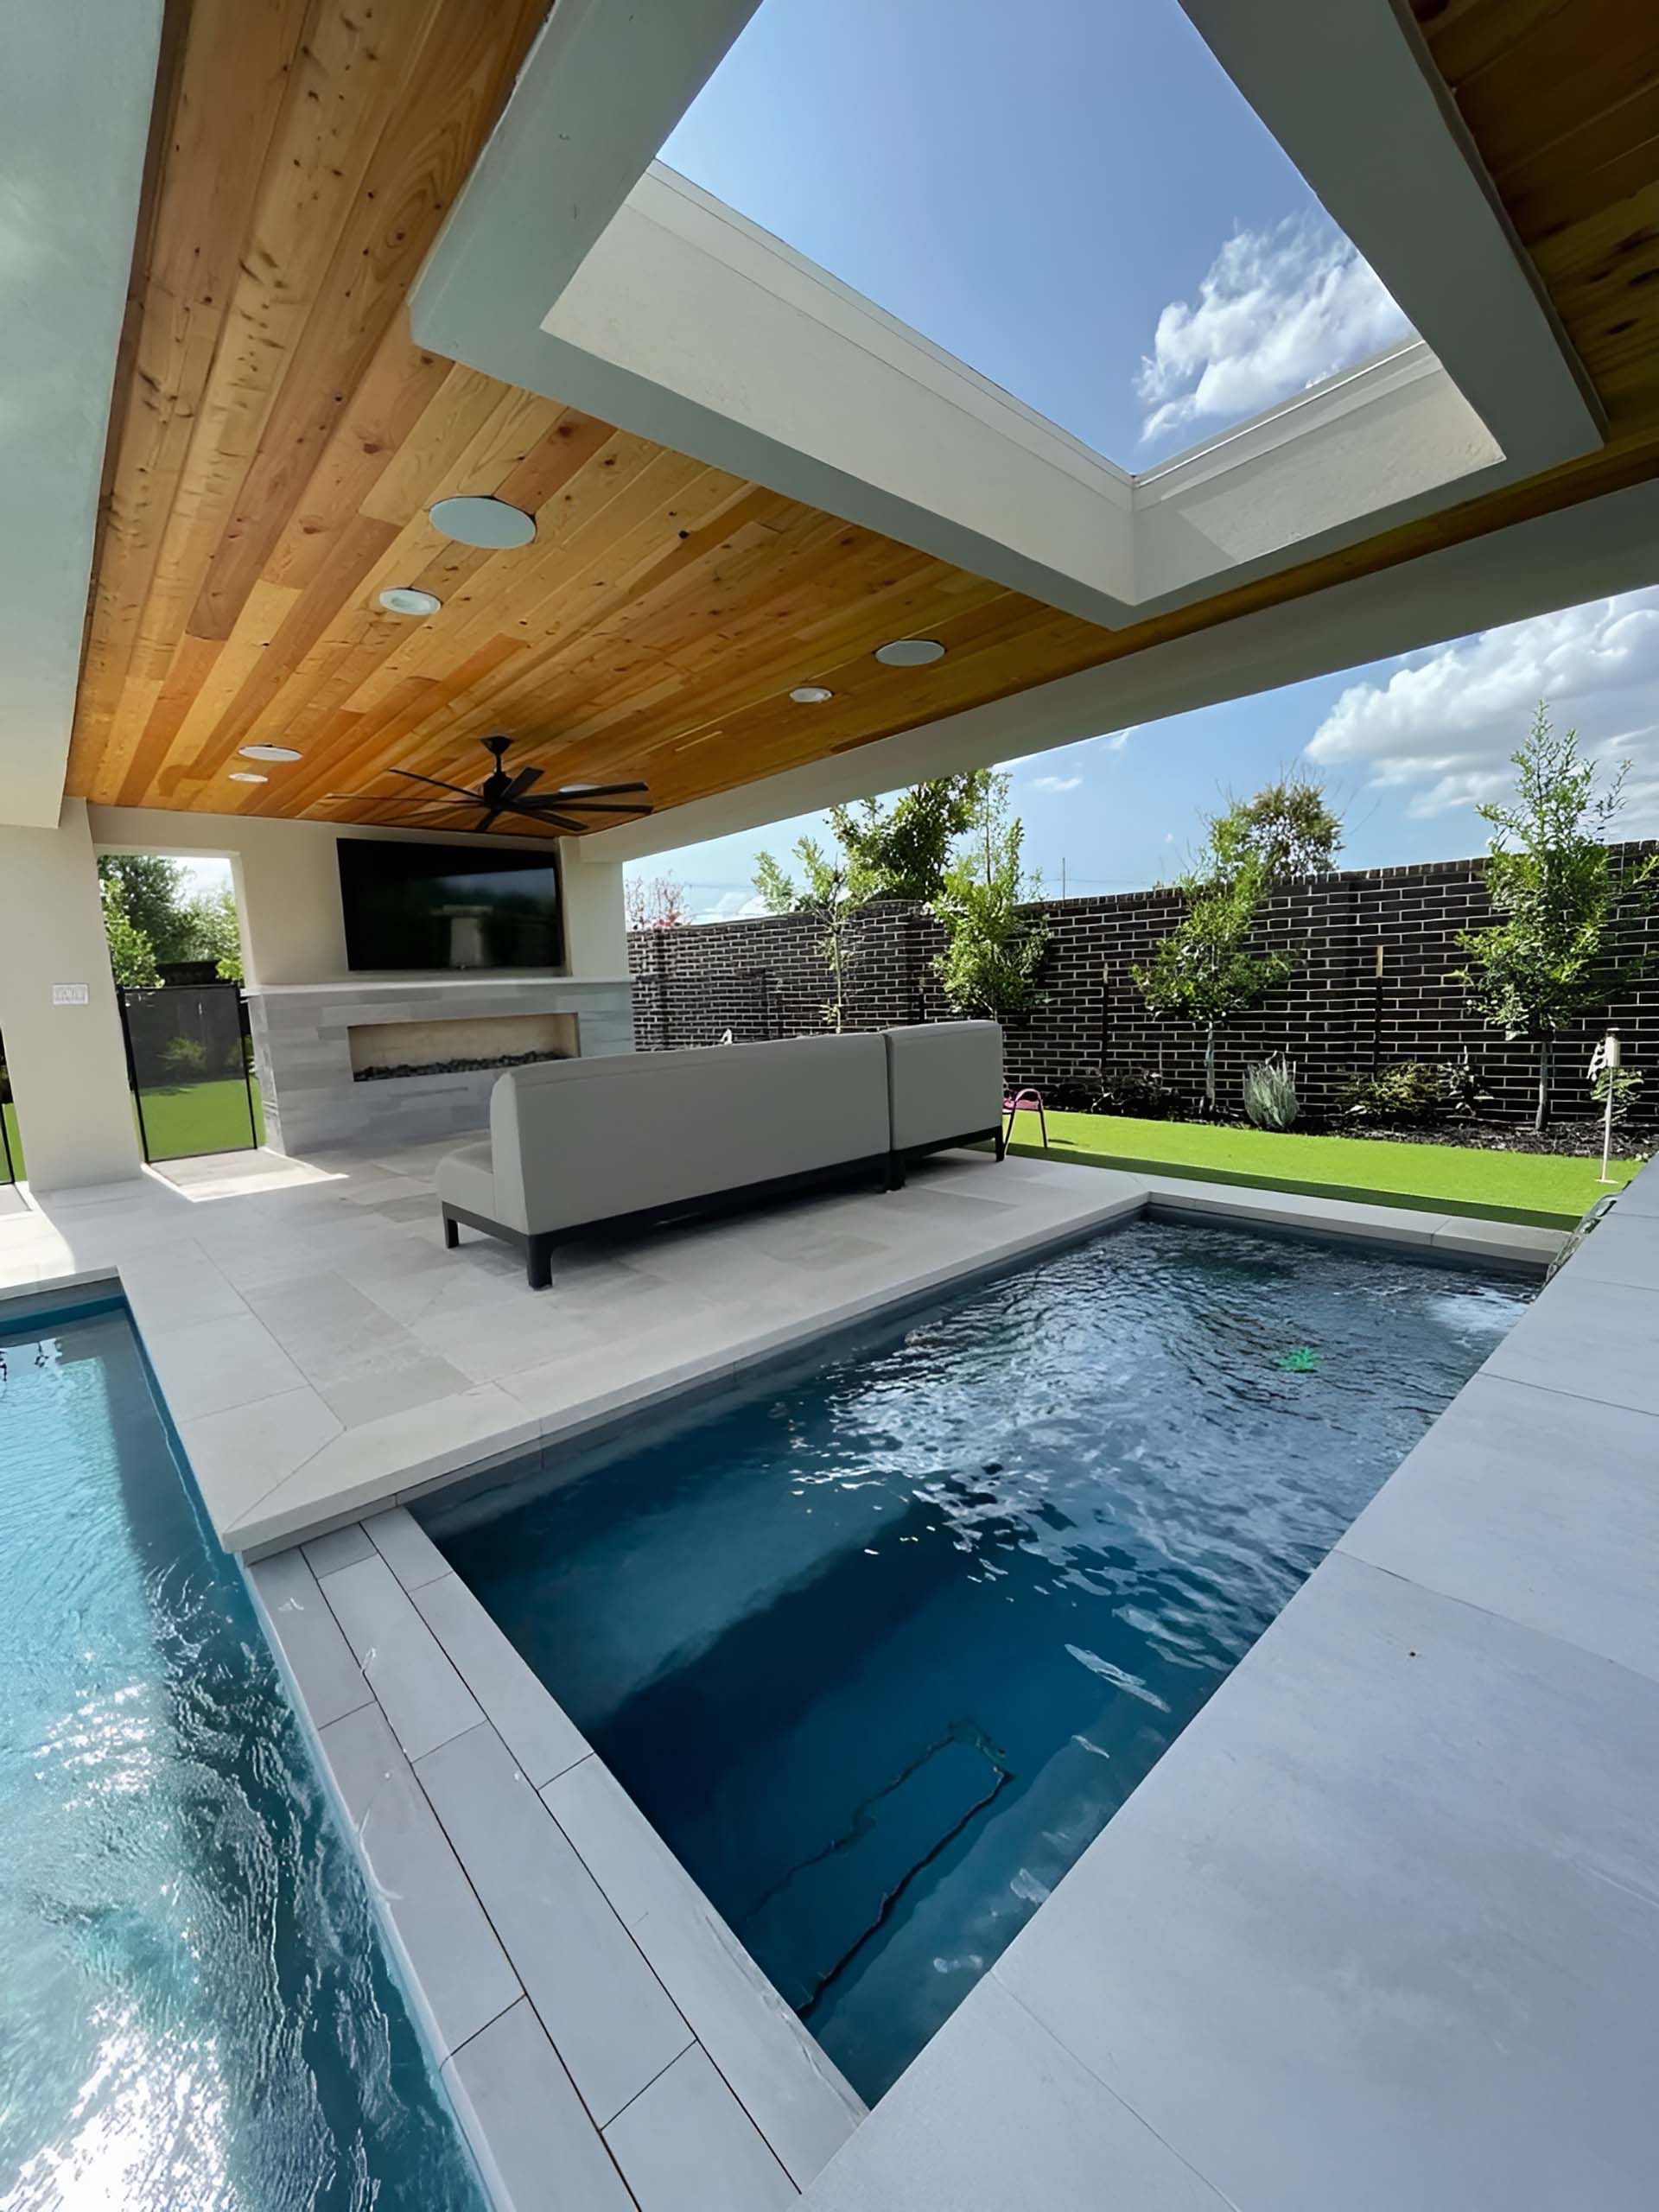 Patio with a pool and an outside tv and couch